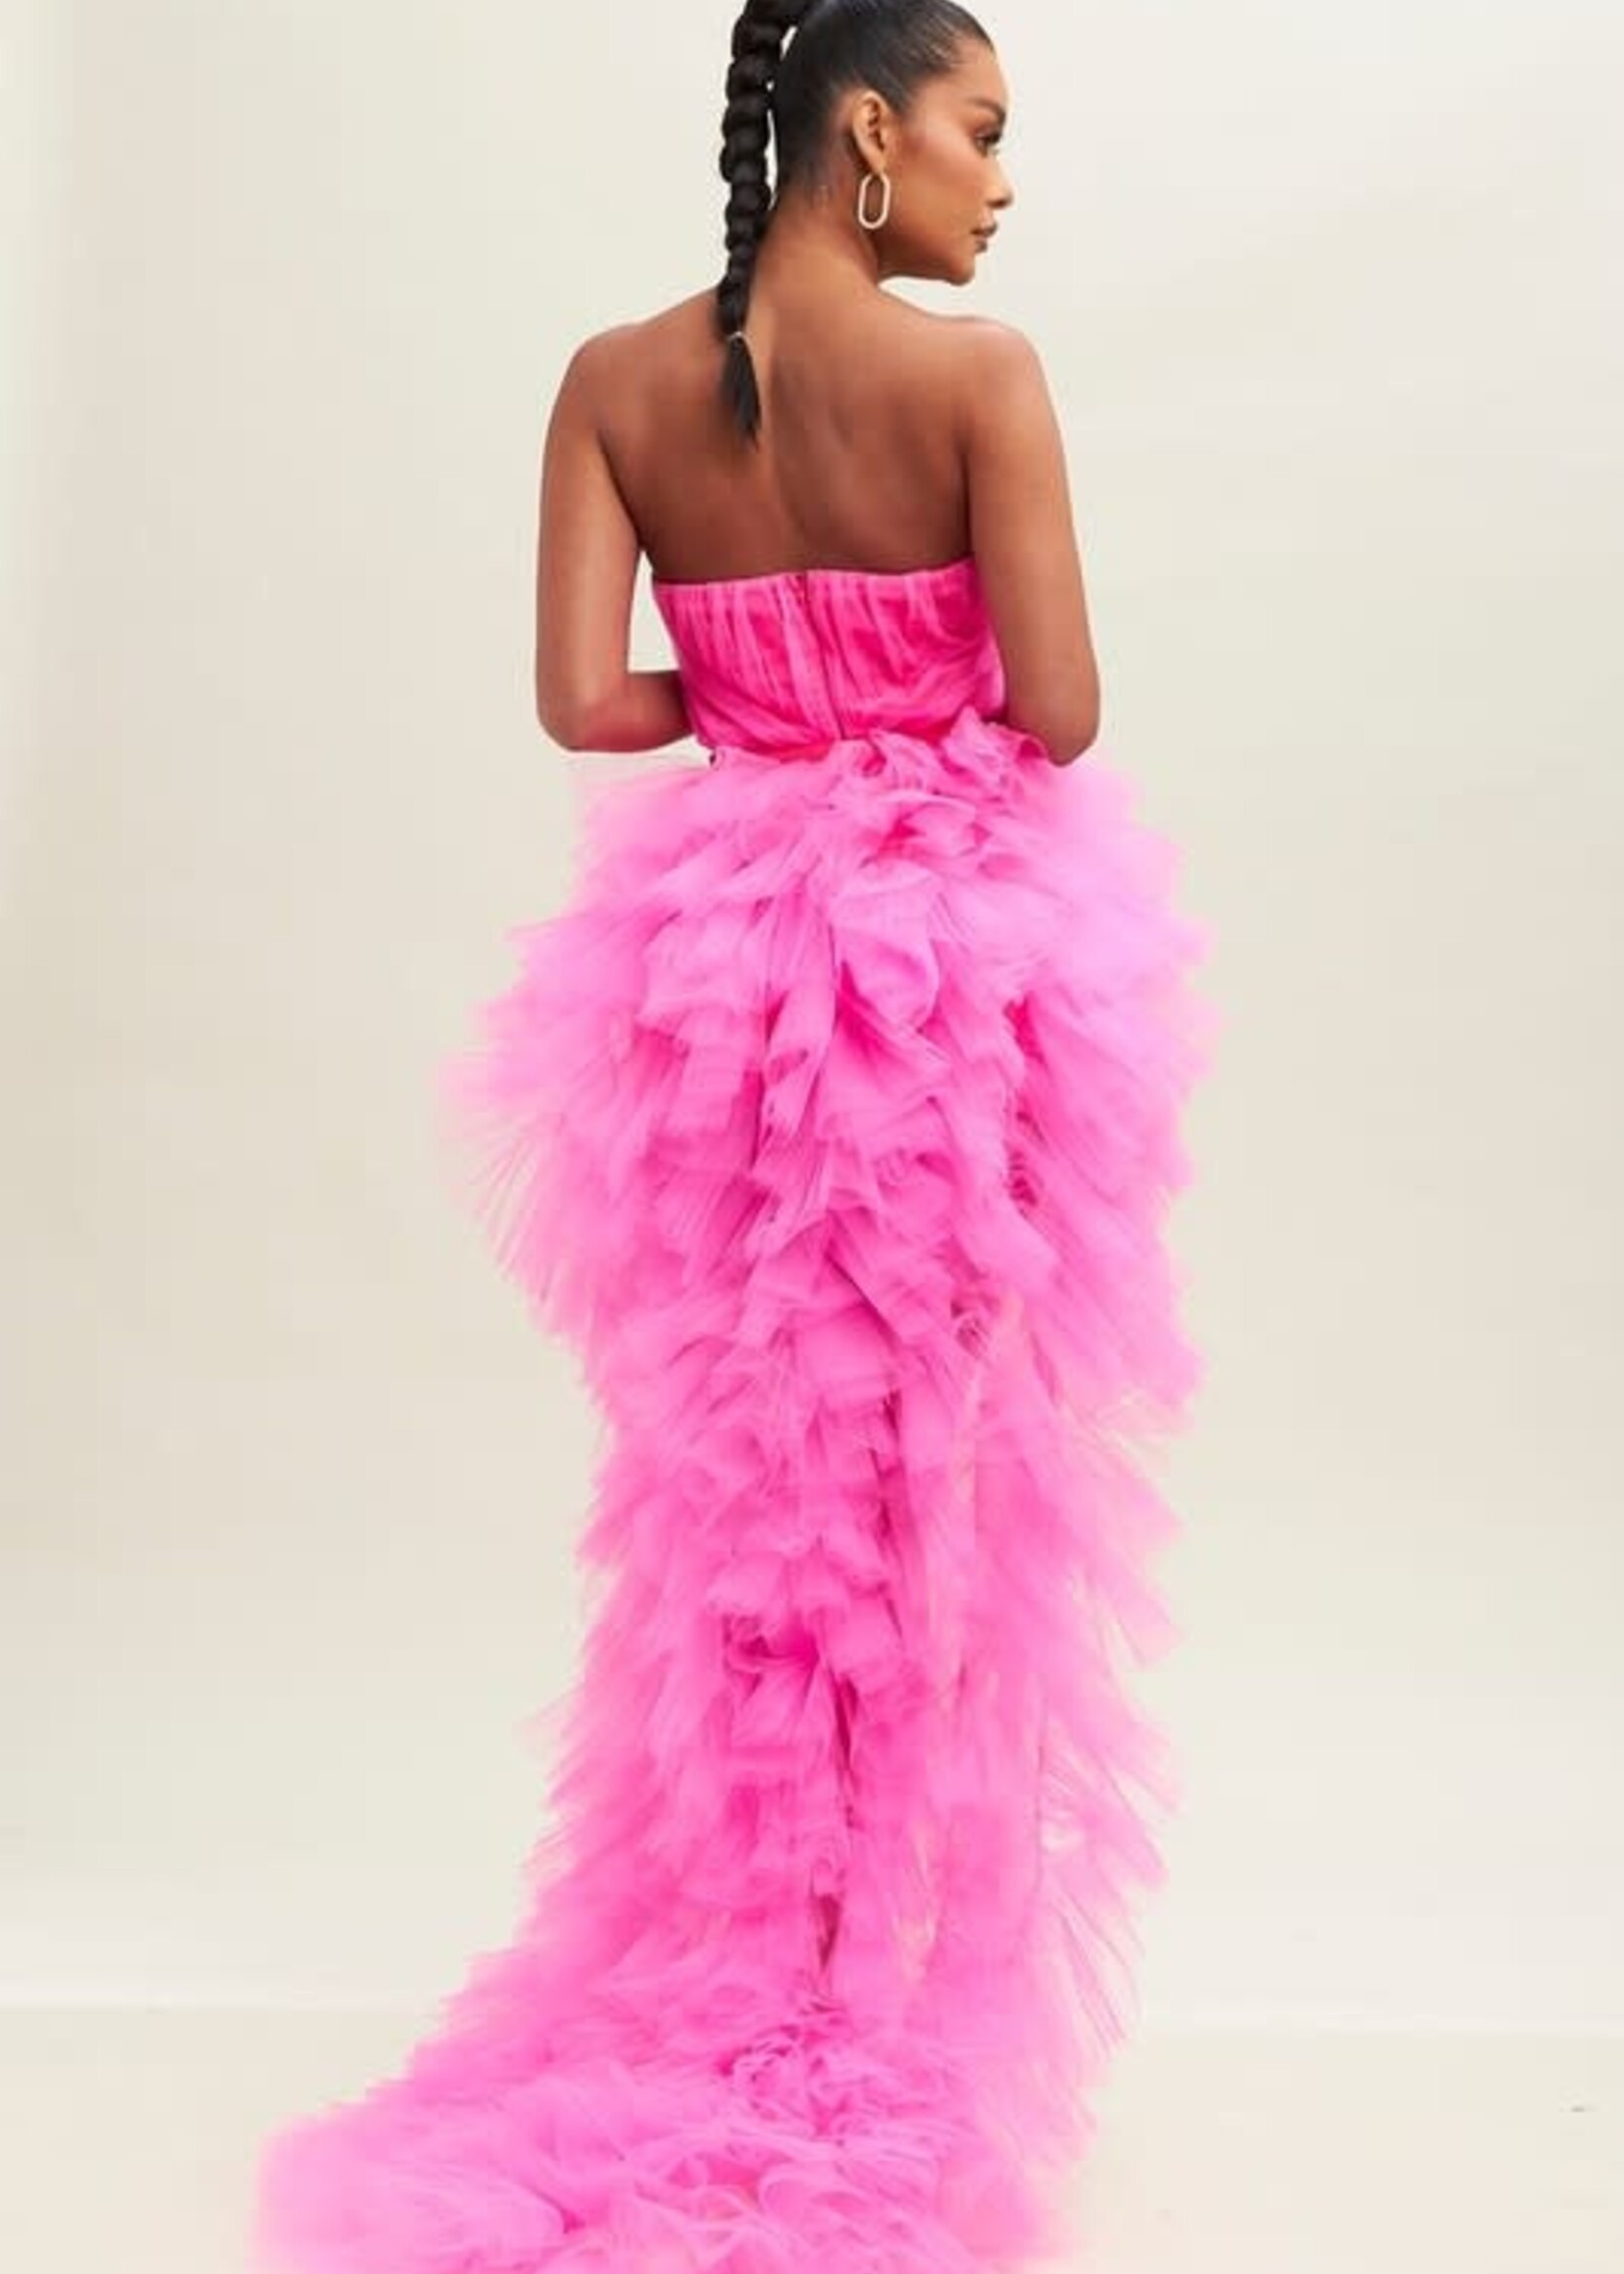 Magical Moment Hot Pink Tulle Dress